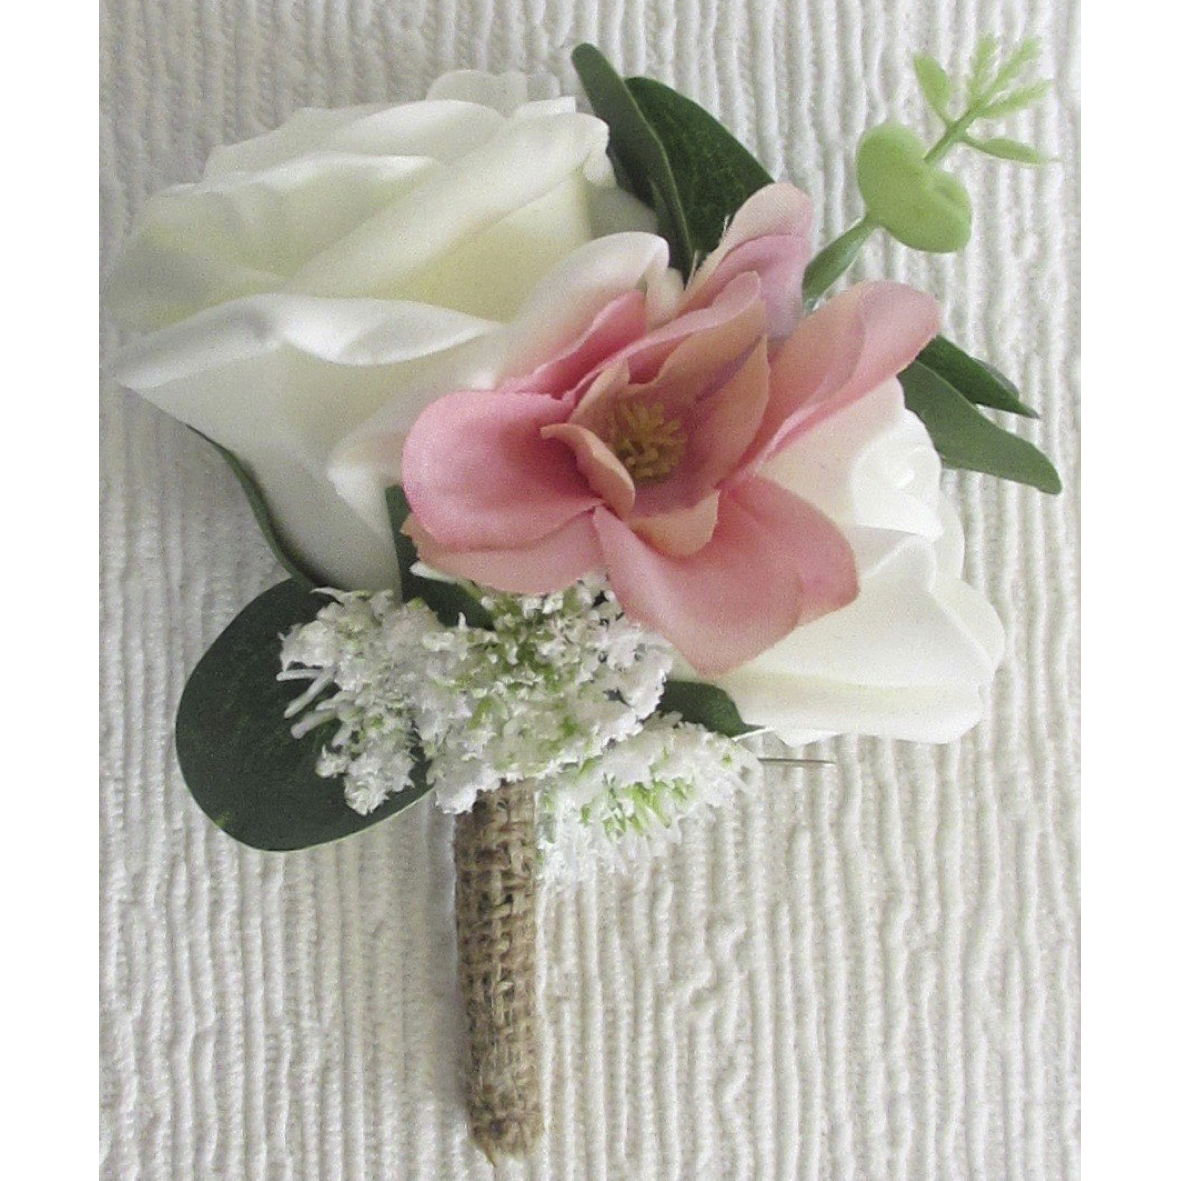 Ivory Rose & Bud with Pink Blossom Flower, Queen Anne Lace Flowers and eucalyptus foliage